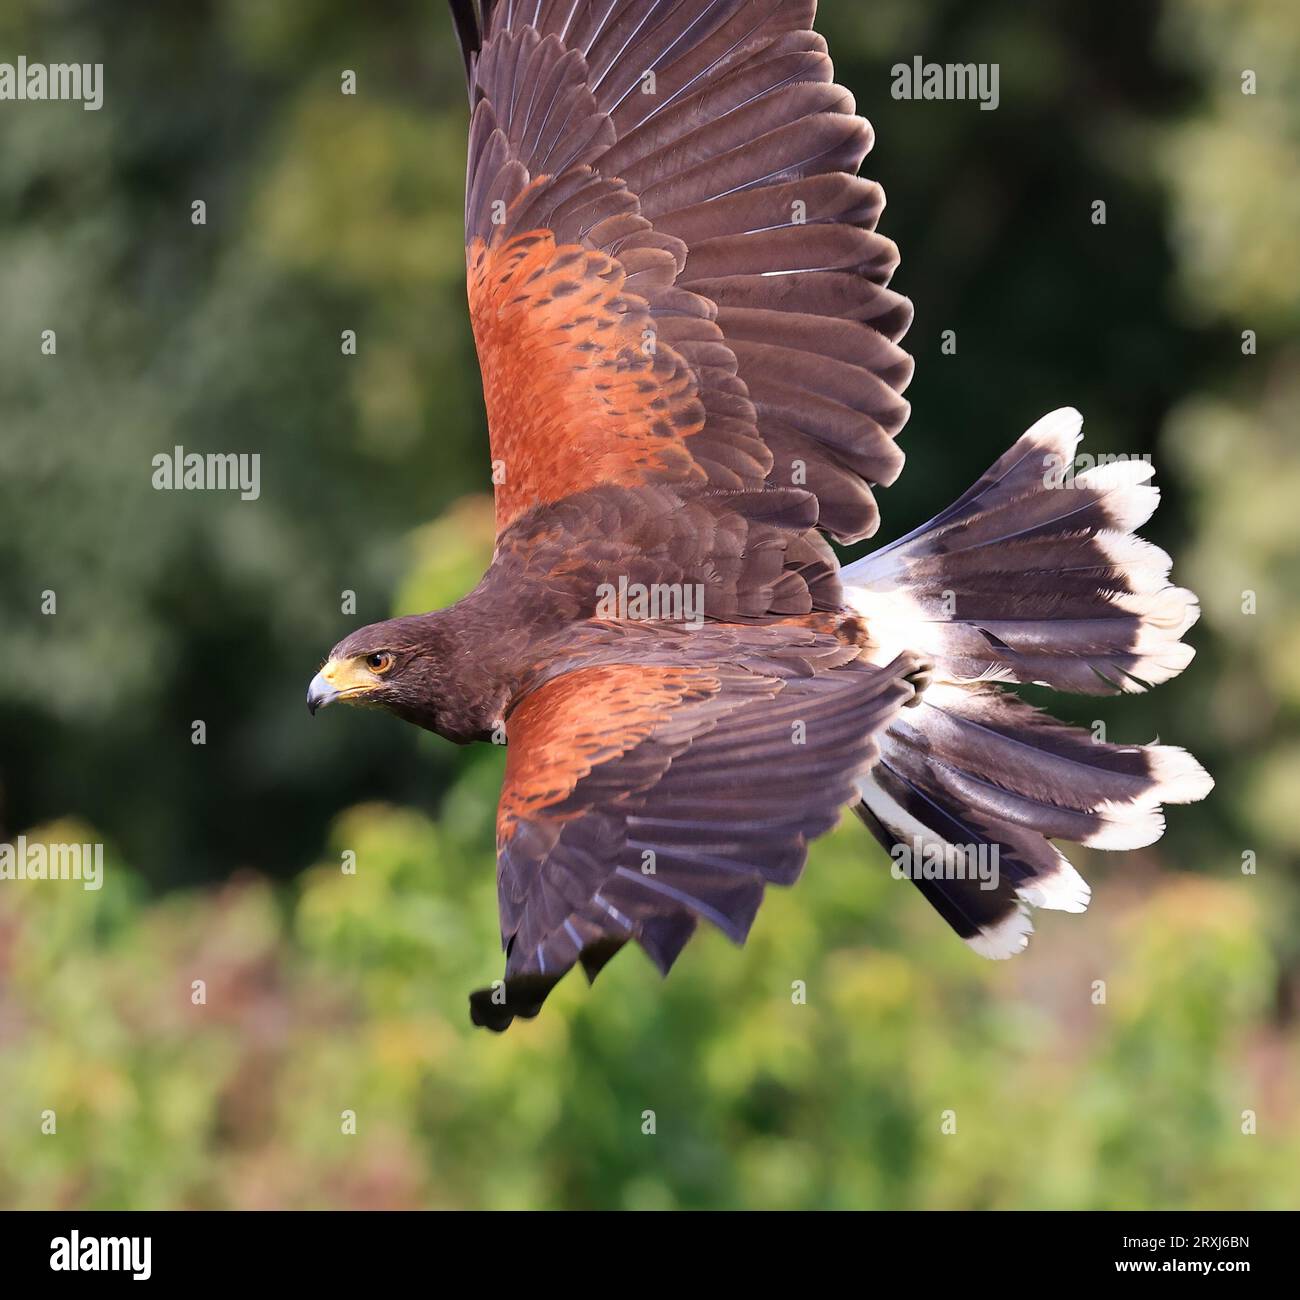 Harris's hawk flying on the green background Stock Photo